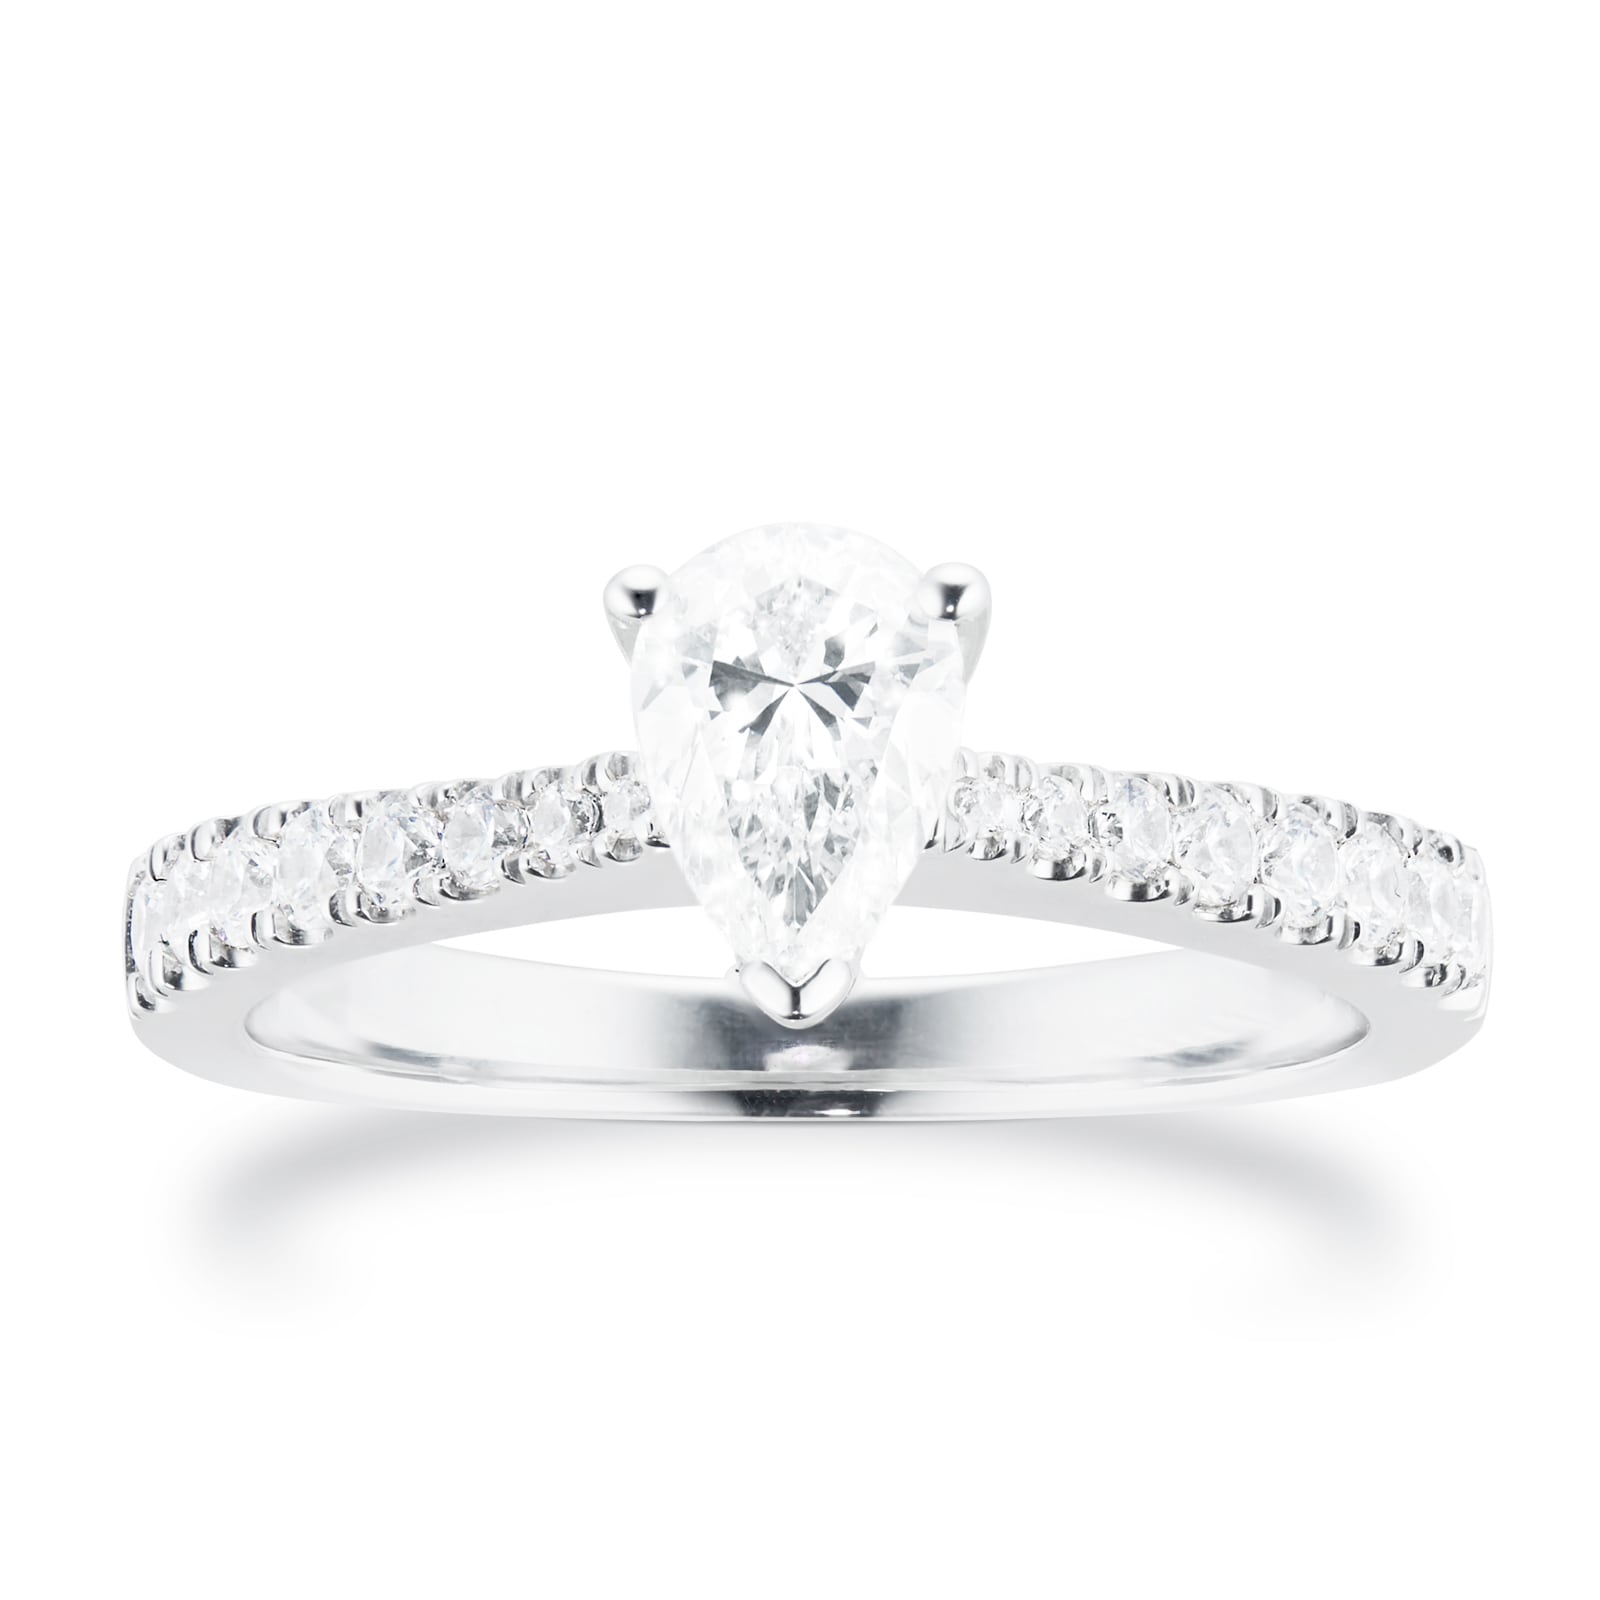 Platinum 0.70cttw Goldsmiths Brightest Diamond Pear Cut Solitaire Engagement Ring - Ring Size I